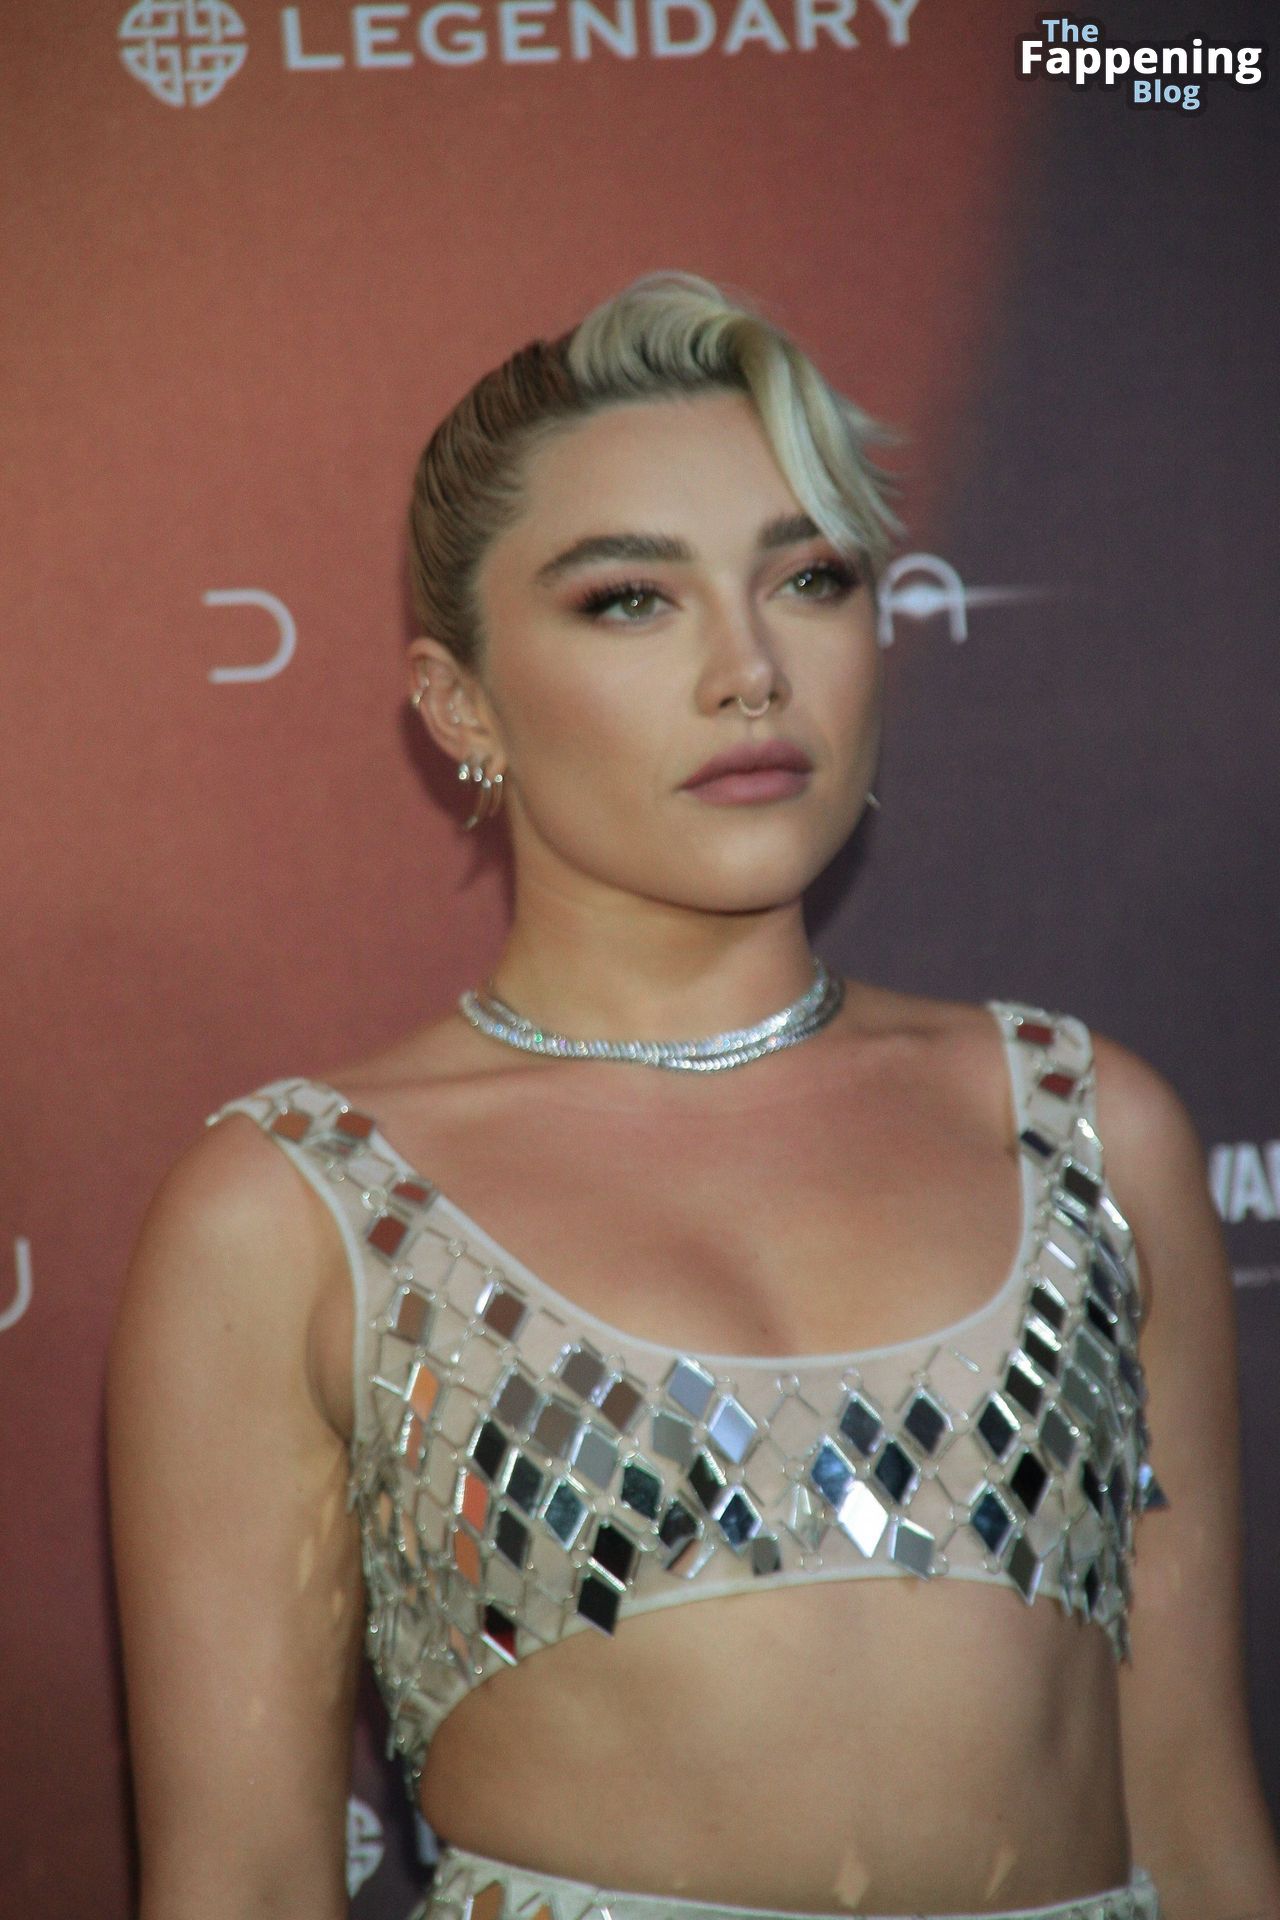 Florence-Pugh-Sexy-37-The-Fappening-Blog.jpg